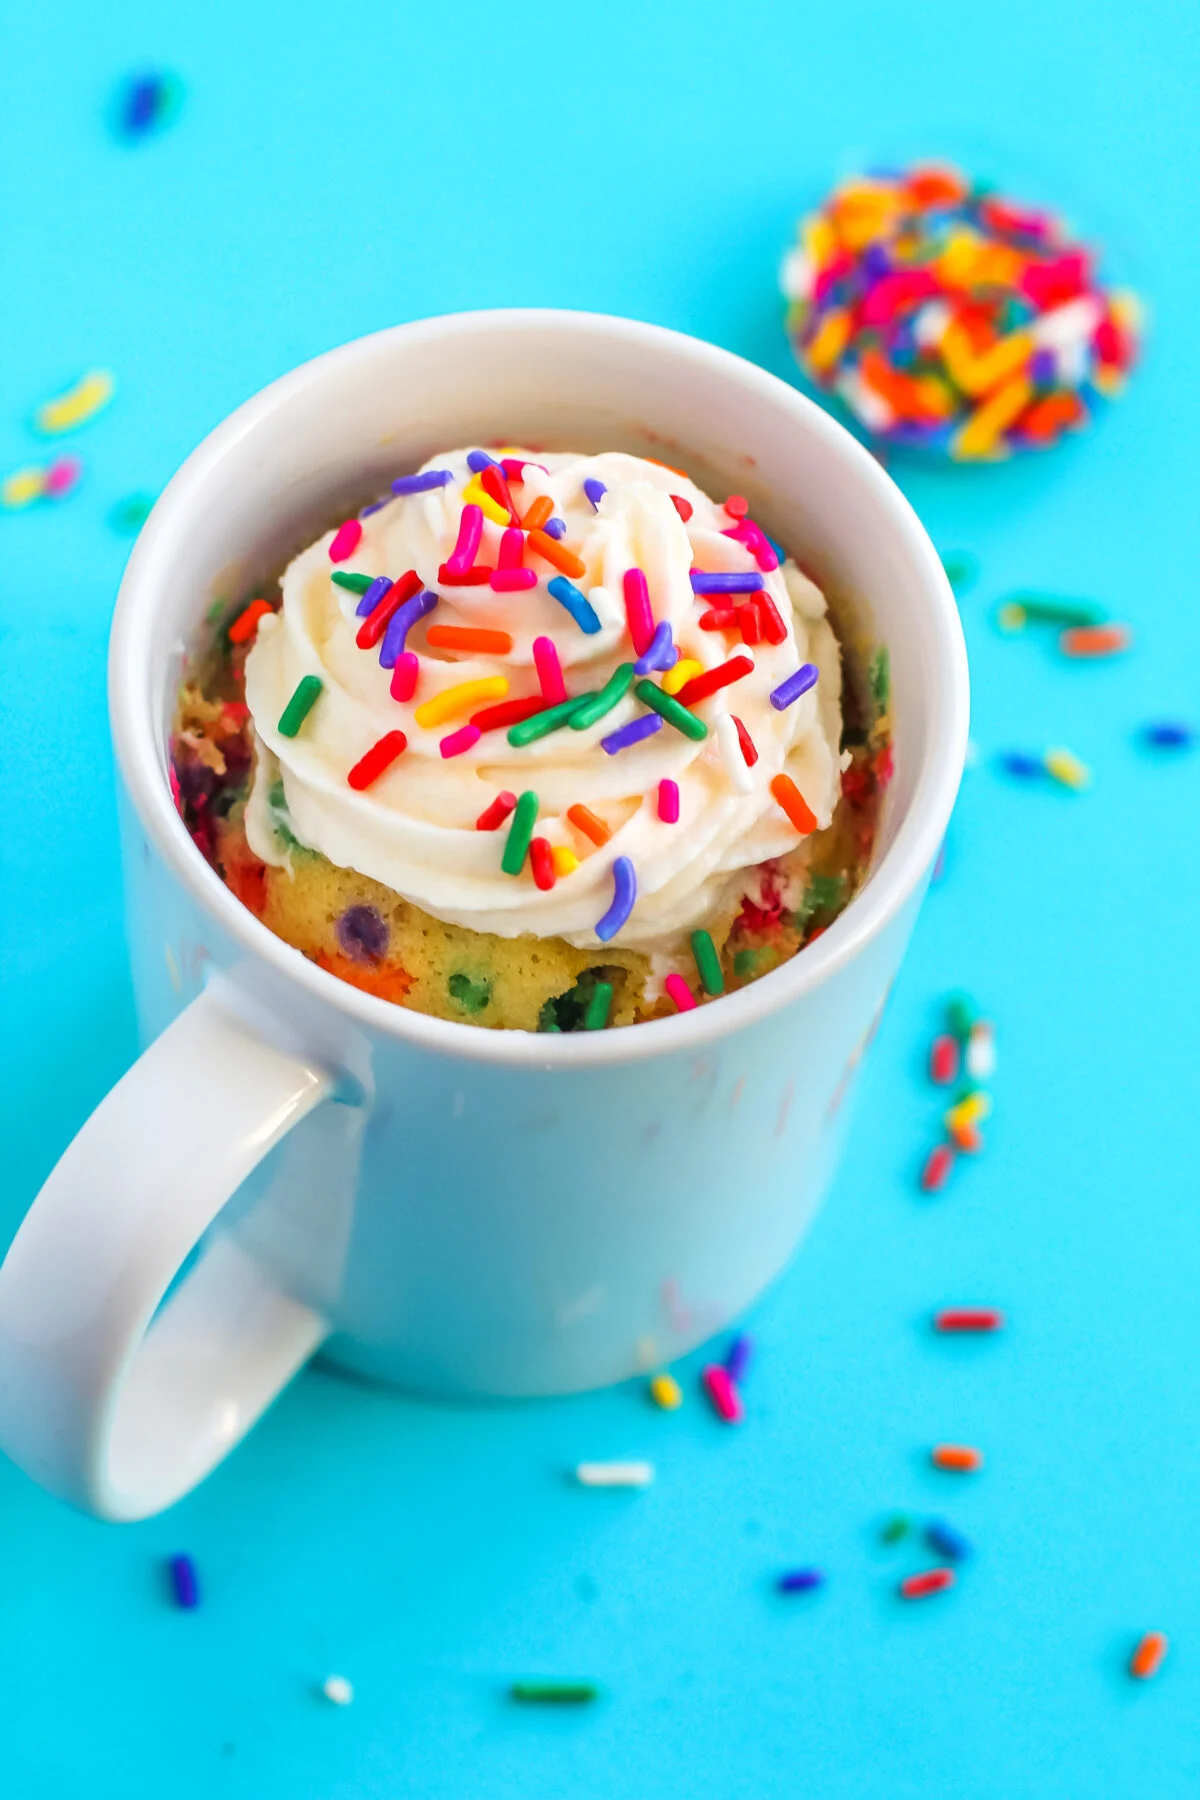 Make a funfetti mug cake that's moist, fluffy, and full of sprinkles. This single-serve cake recipe is easy to whip up in the microwave!